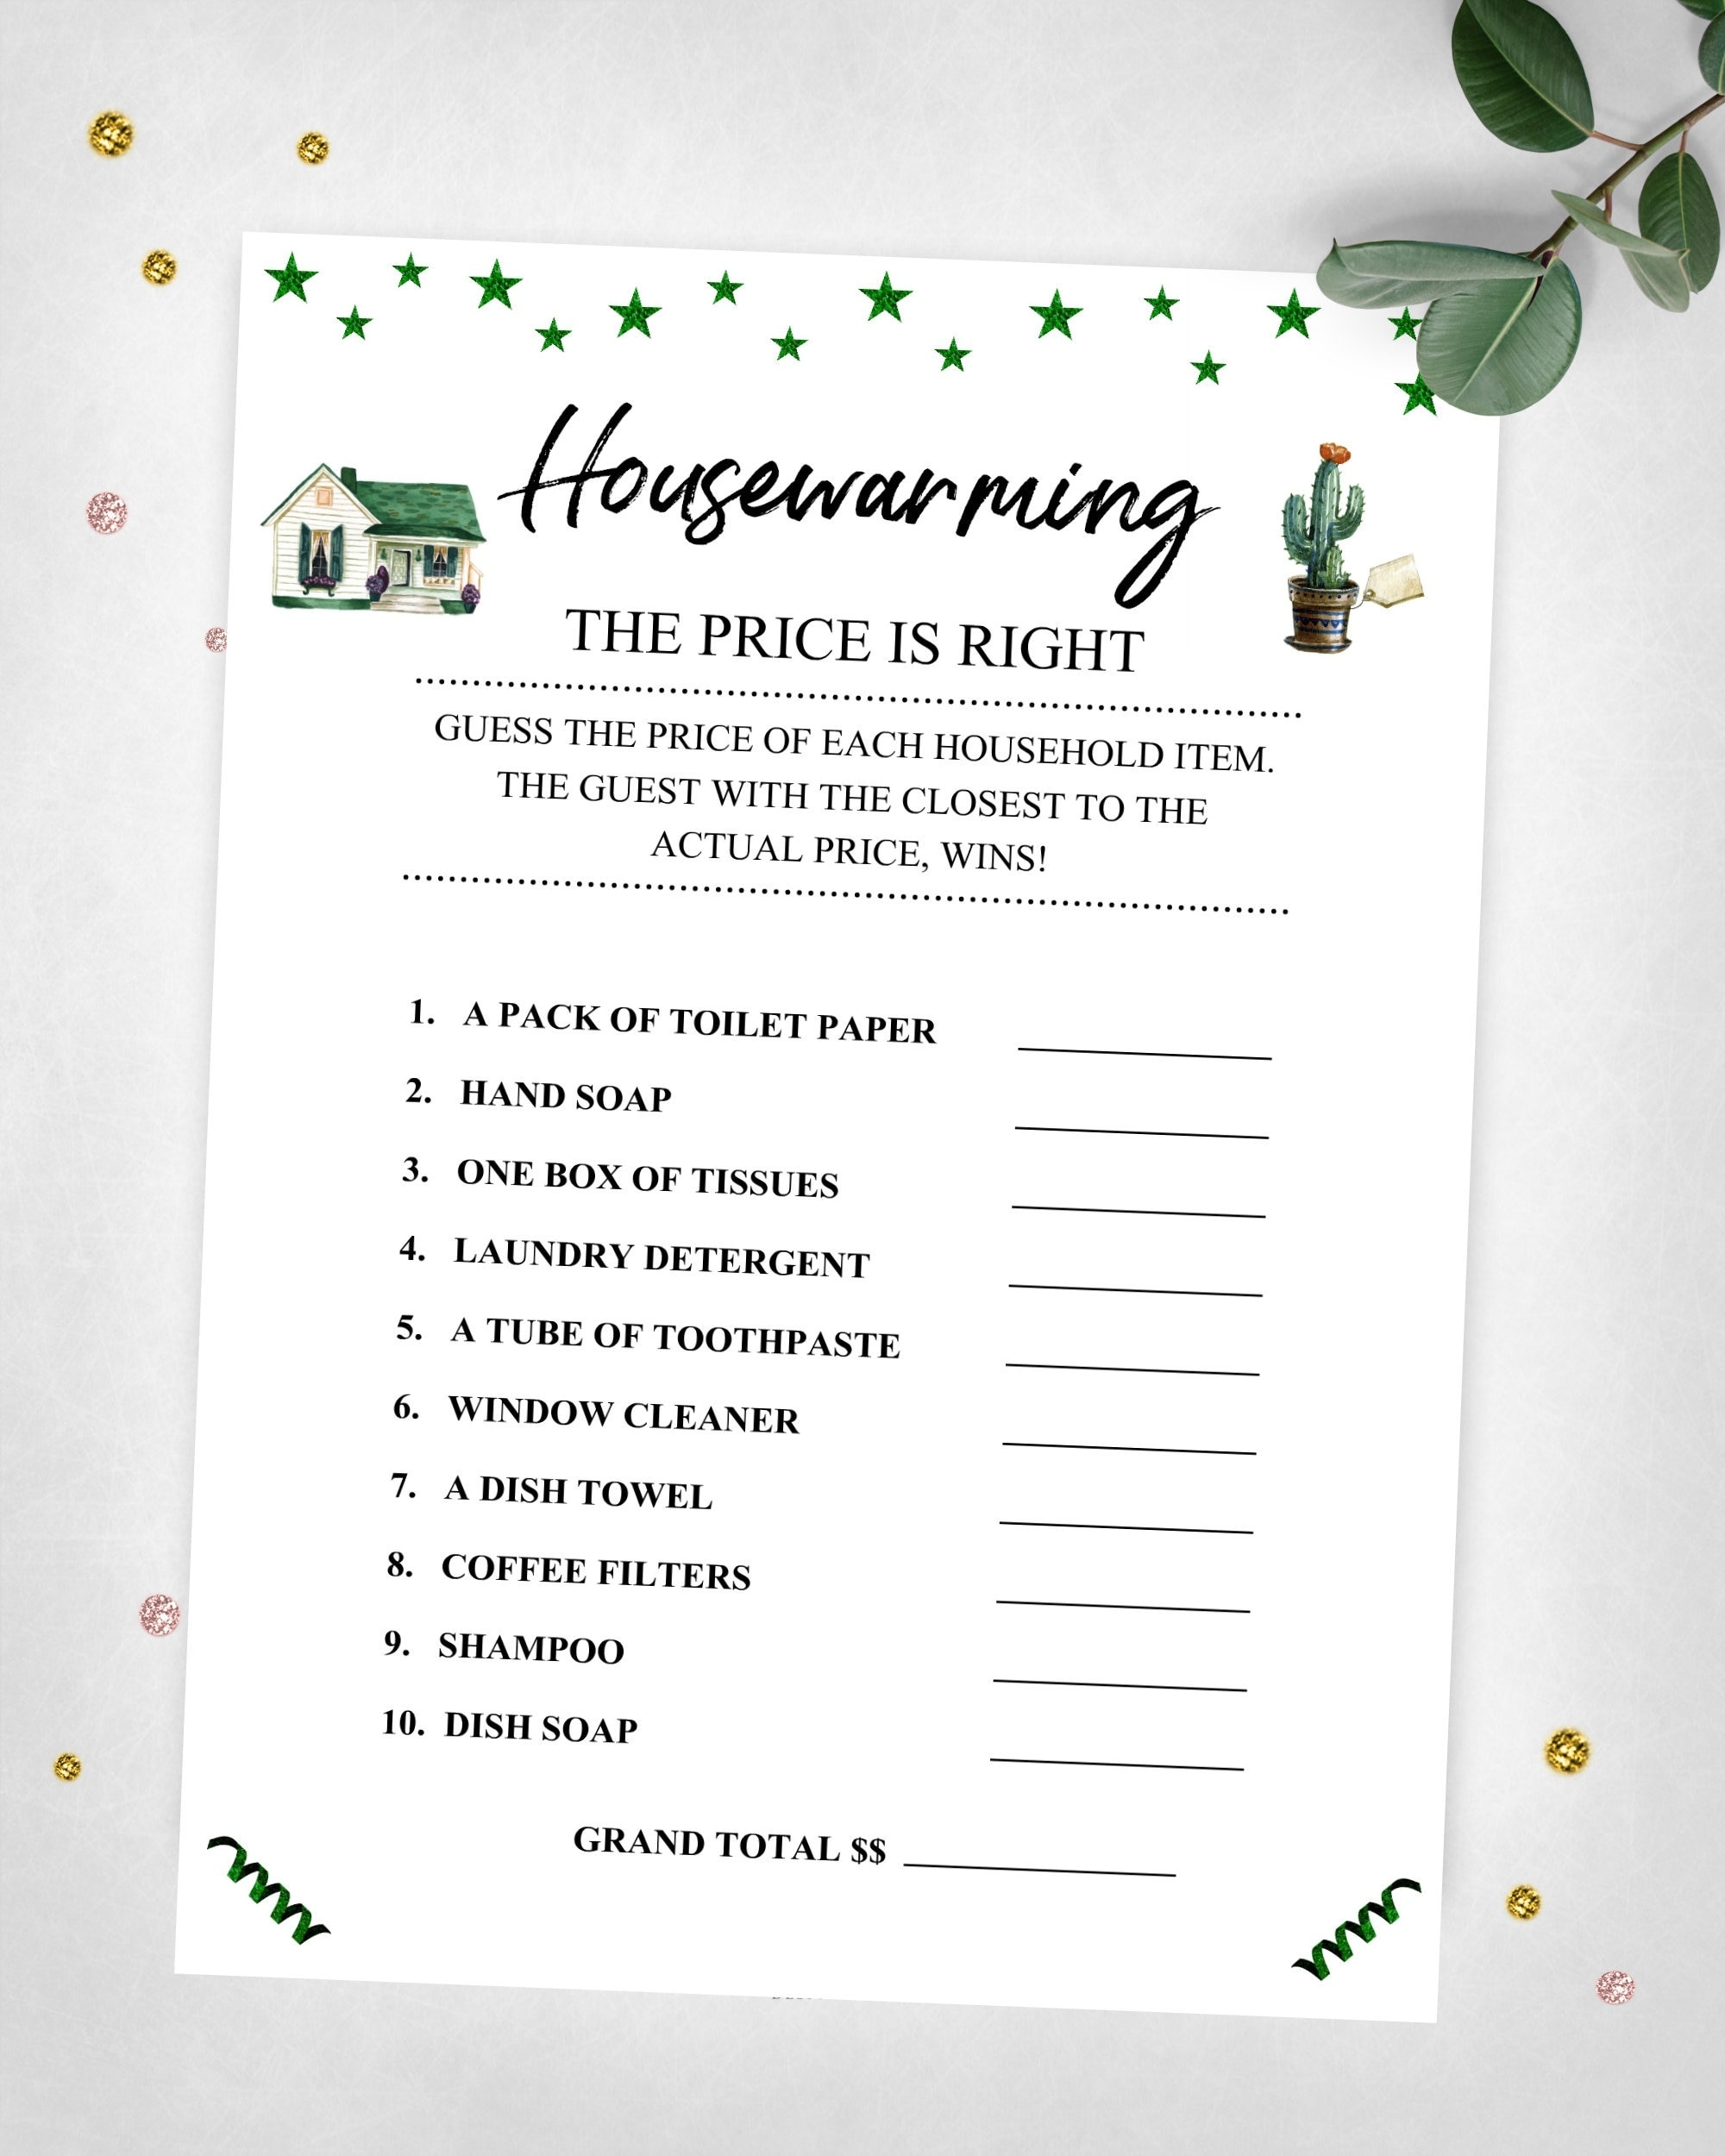 Housewarming The Price Is Right Housewarming Party Game Real Estate New Home Party Instant Digital Download Printable Game Etsy Denmark